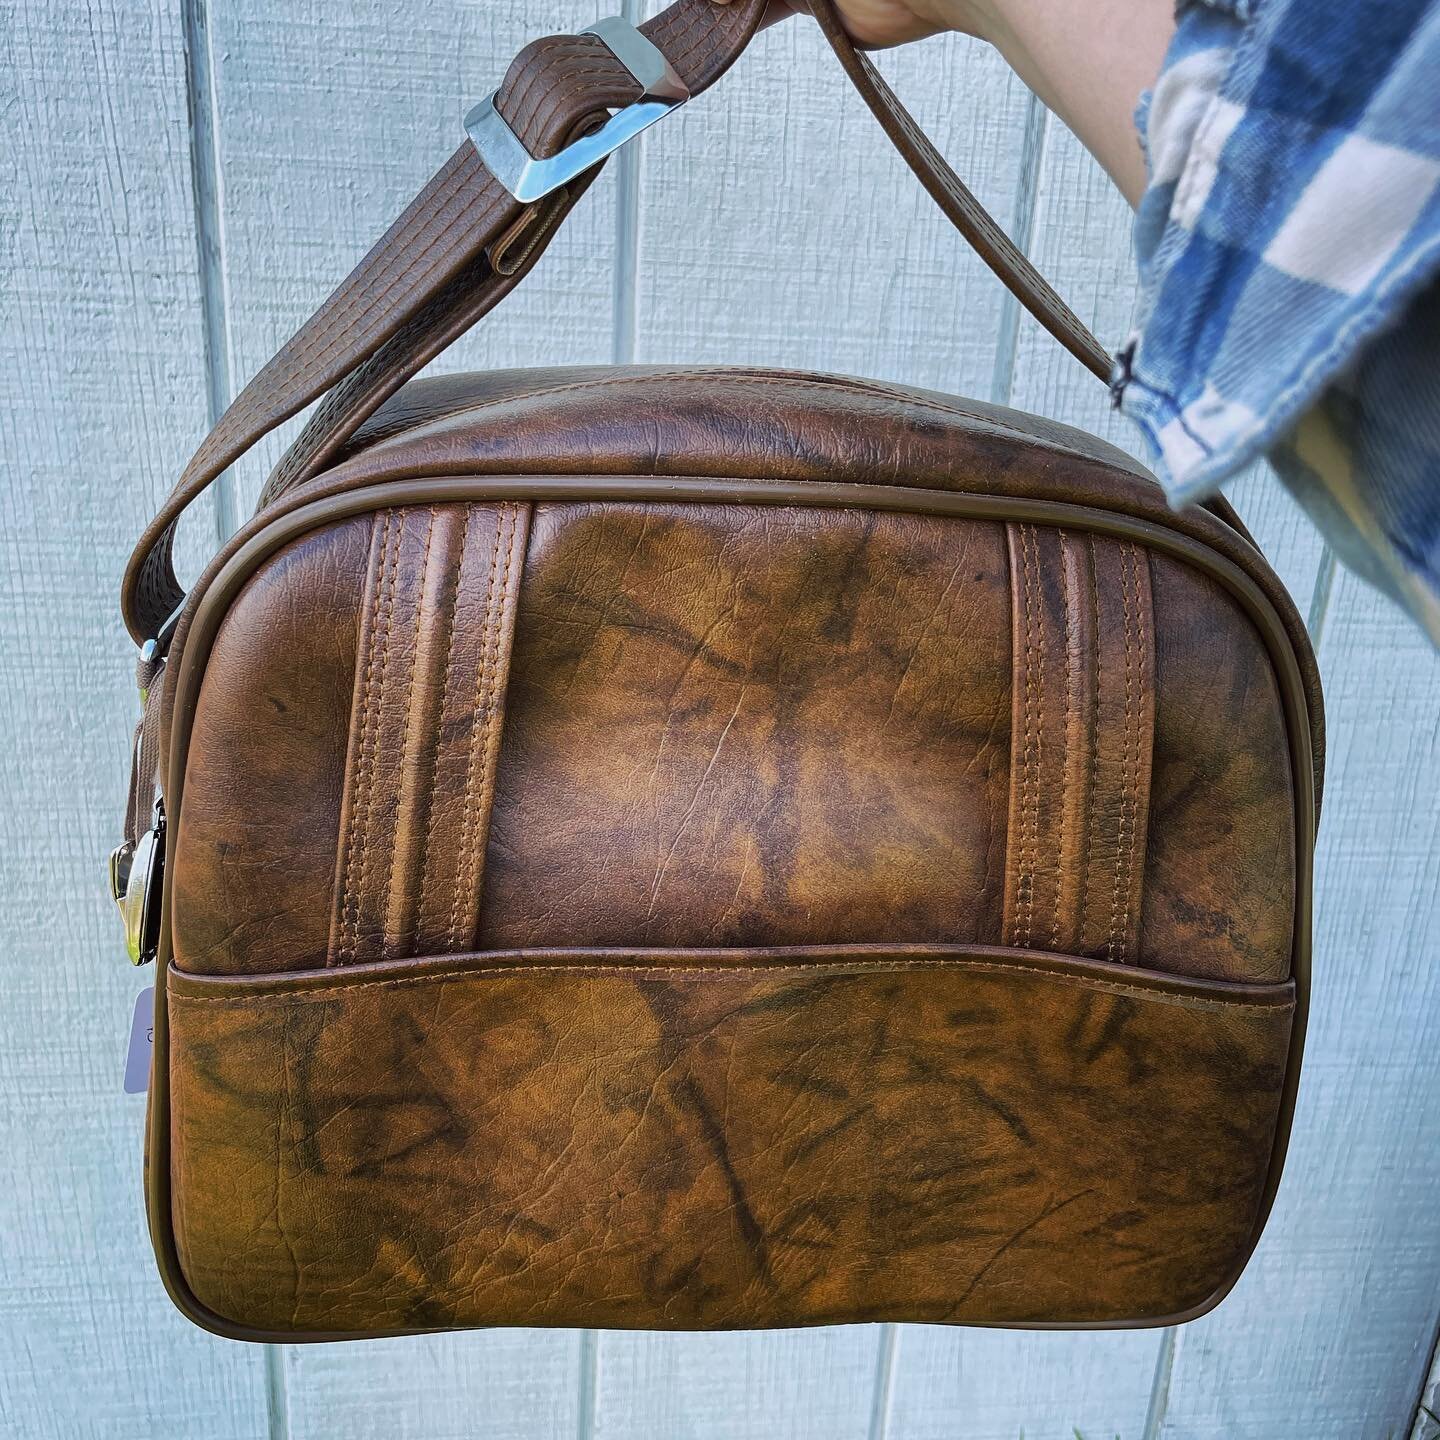 Need a weekend bag?? This beaut along with a slew of other goods will be up for grabs (for local pick up) in the stories tomorrow afternoon! Just in time for the long weekend! Tell your friends. :)